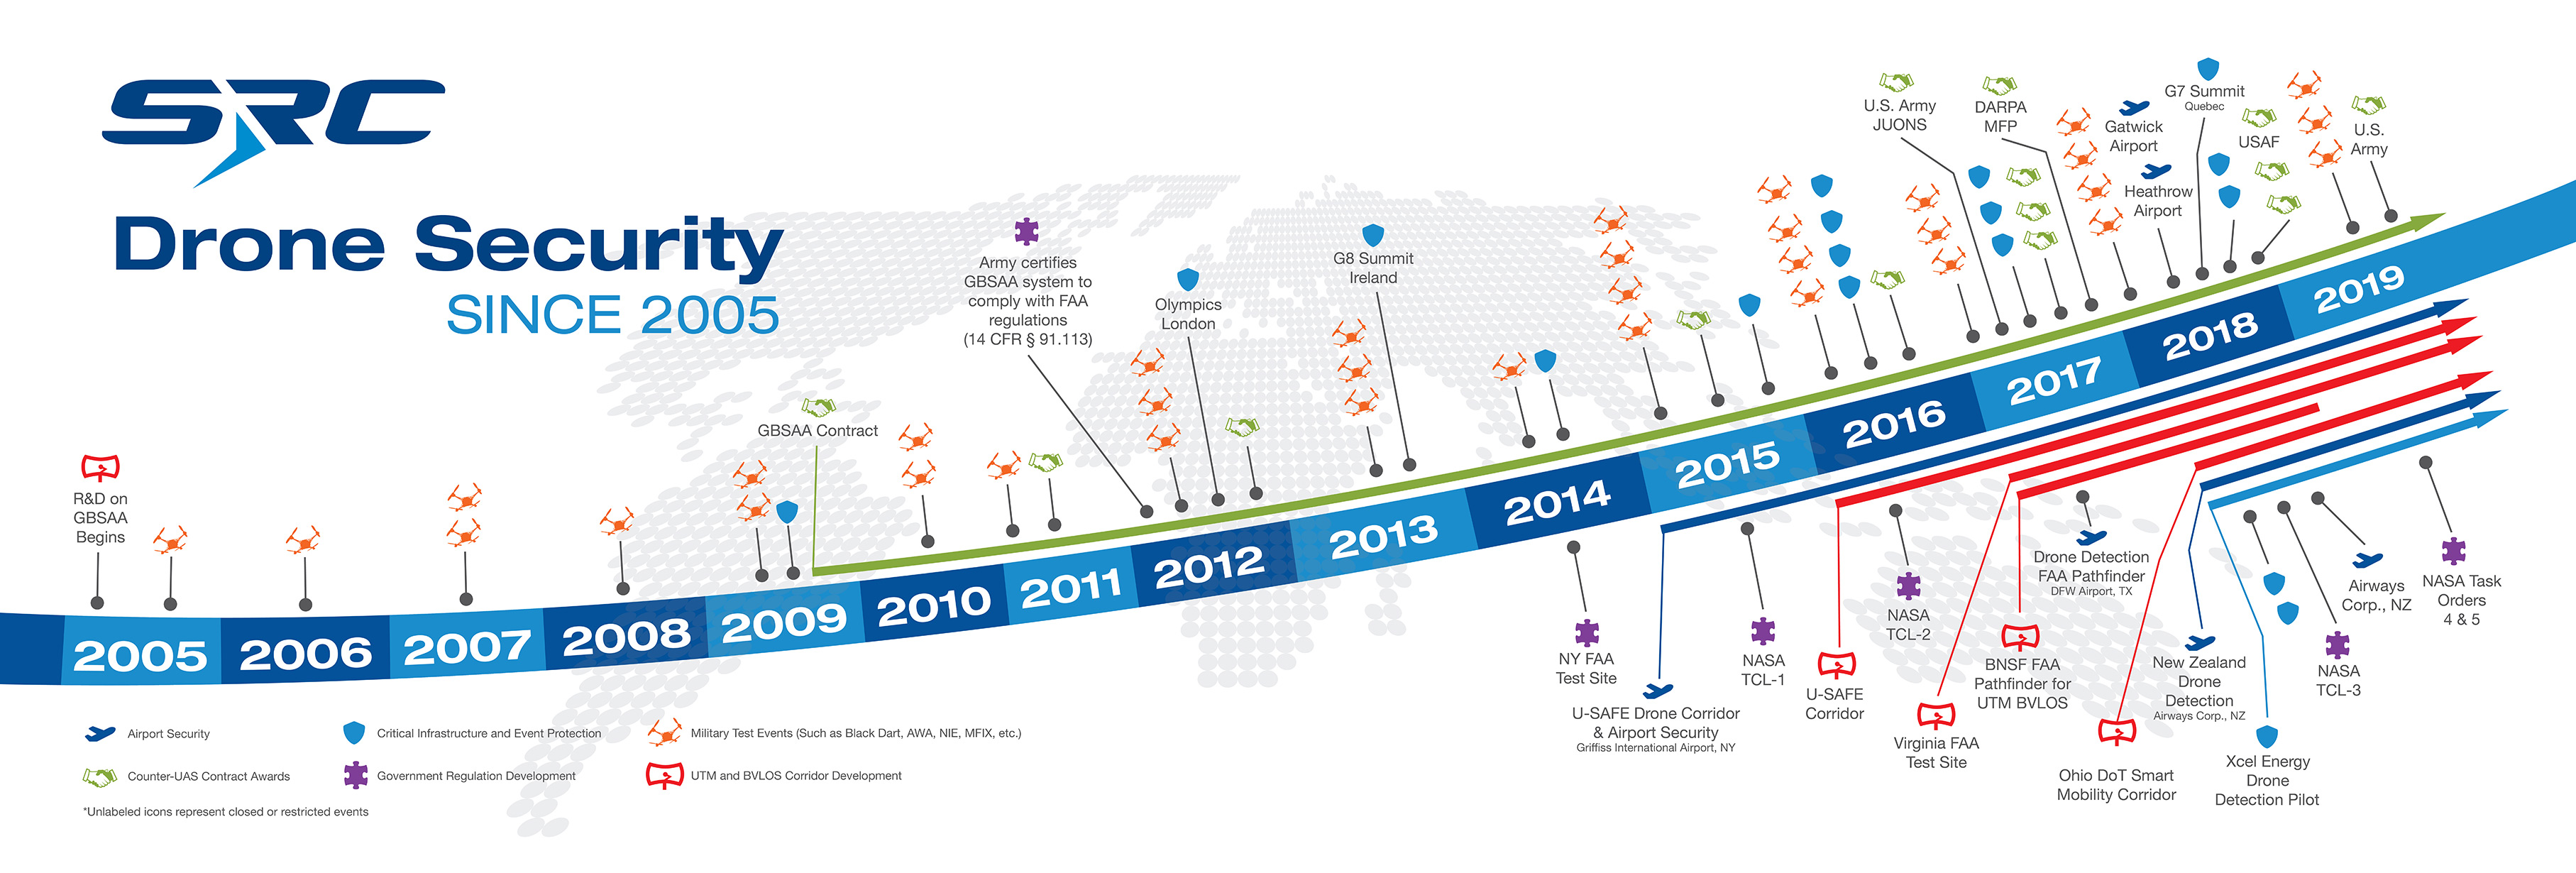 Drone Security since 2005 - Timeline of events and milestones for SRC's counter-UAS technology